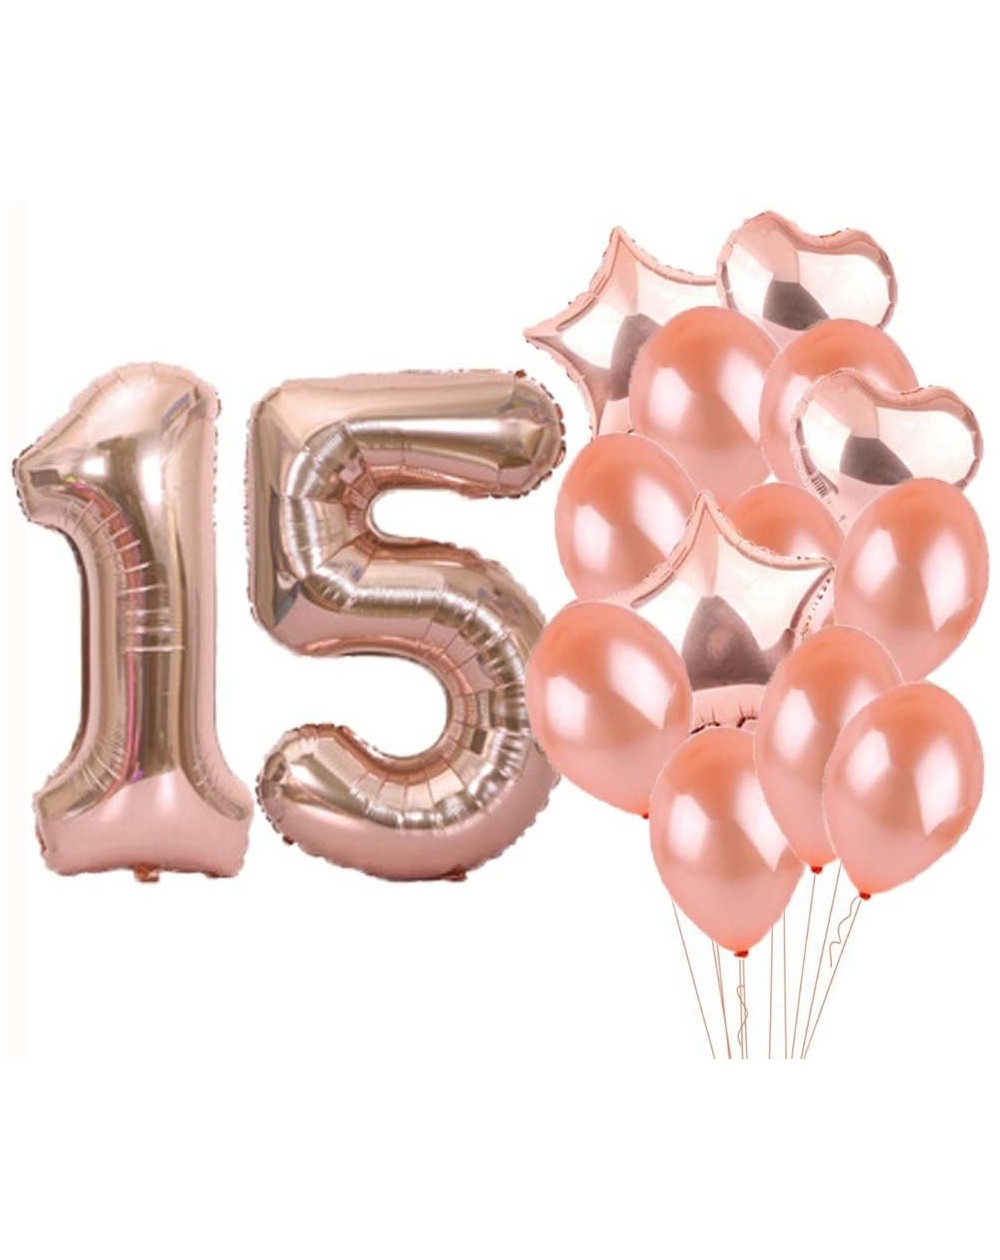 Balloons Sweet 15th Birthday Decorations Party Supplies-Rose Gold Number 15 Balloons-15th Foil Mylar Balloons Latex Balloon D...